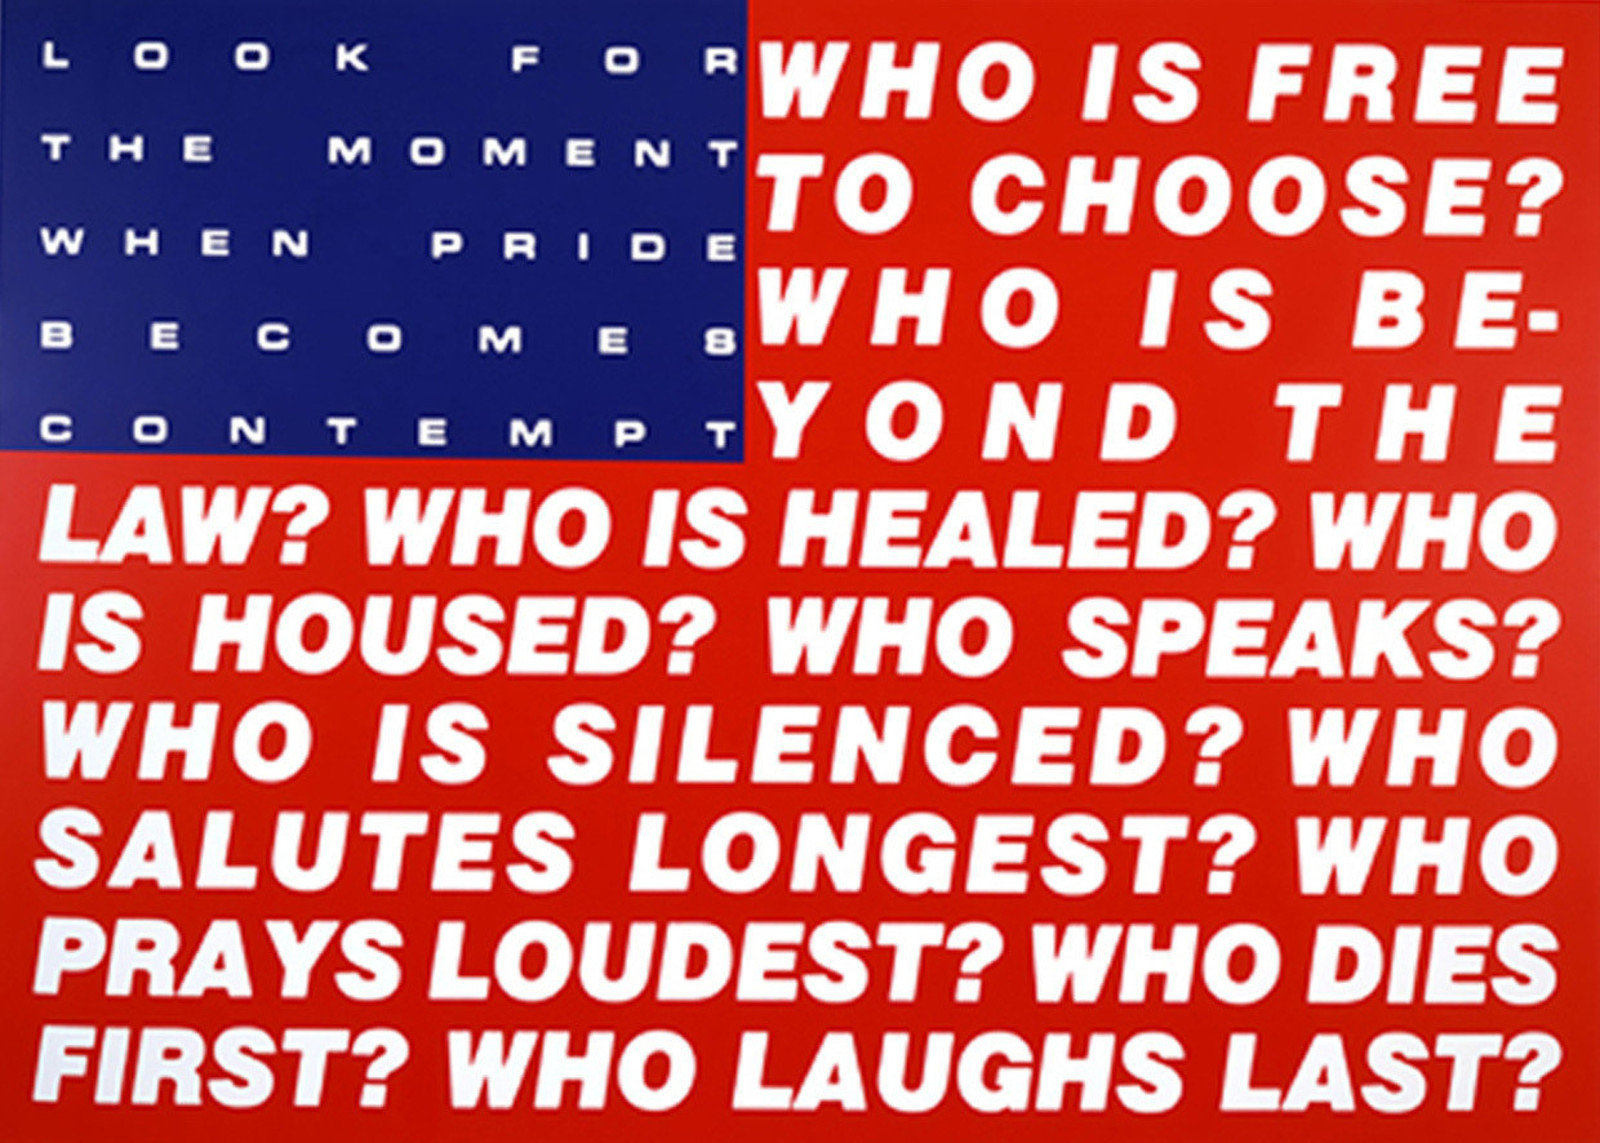 Barbara Kruger  Untitled  (Questions), 1991  Silkscreen  167.6 x 236.2 cm  Courtesy Mary Boone Gallery, New York